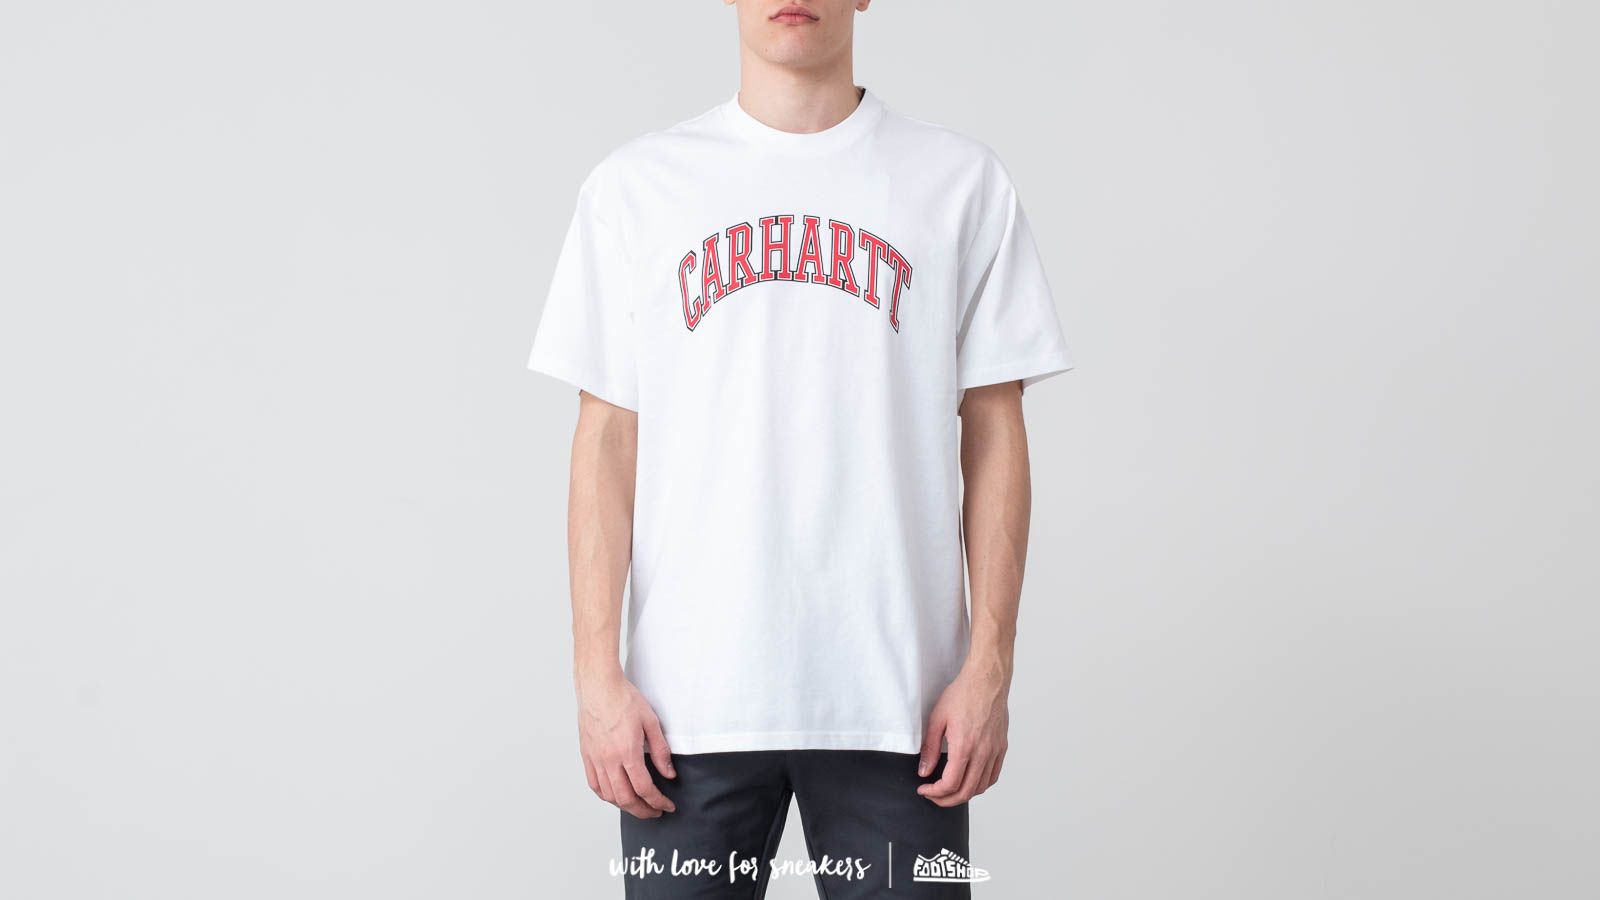 Carhartt Wip Knowledge Tee White At A Great Price $39 - Carhartt Wip Knowledge T Shirt , HD Wallpaper & Backgrounds